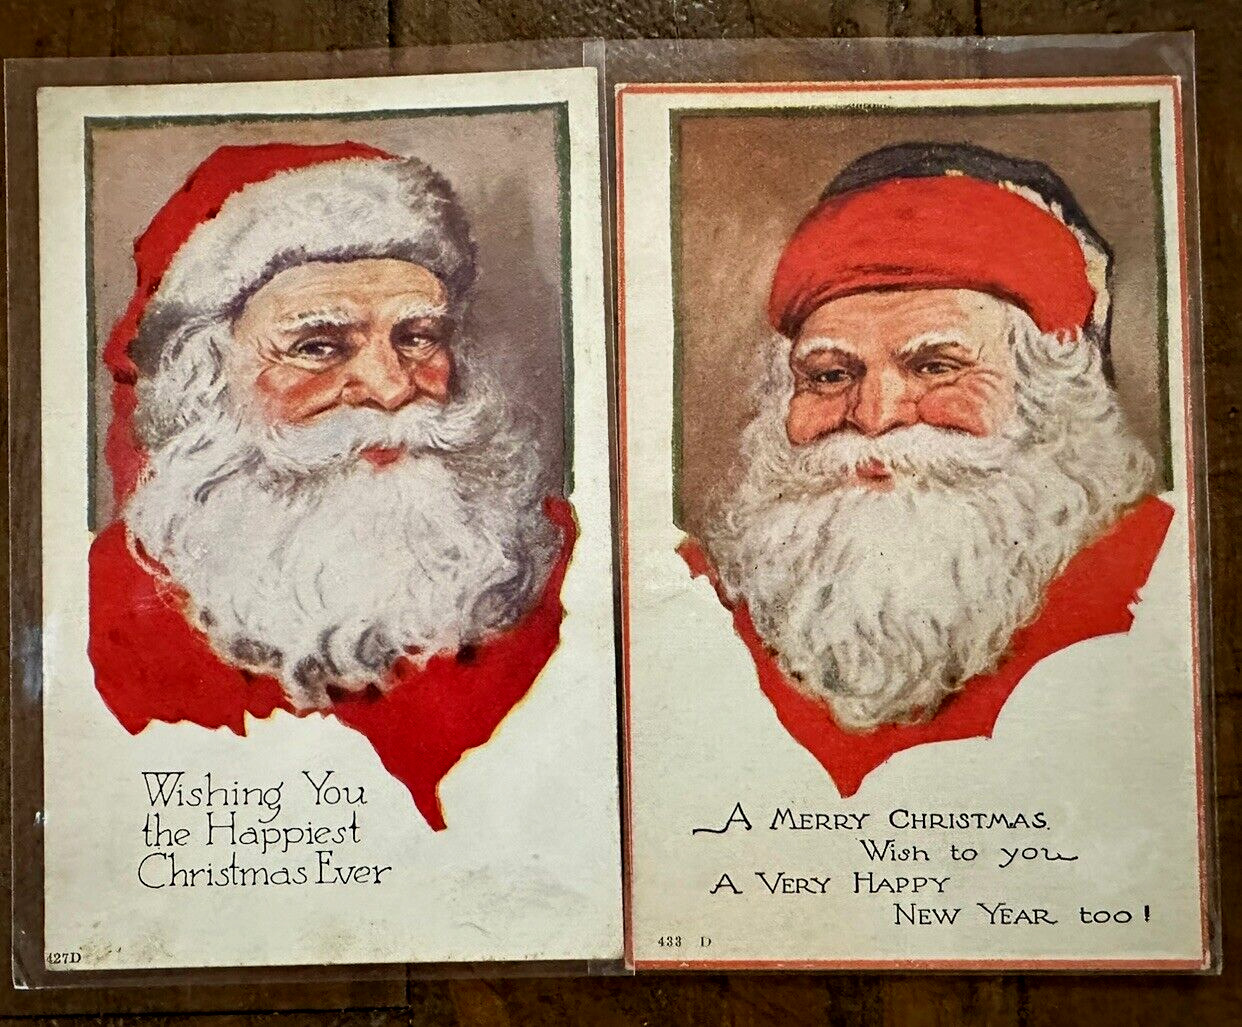 Lot of 2 ~Red Robe Full Face Santa Claus ~Vintage~ Christmas Postcards~k723